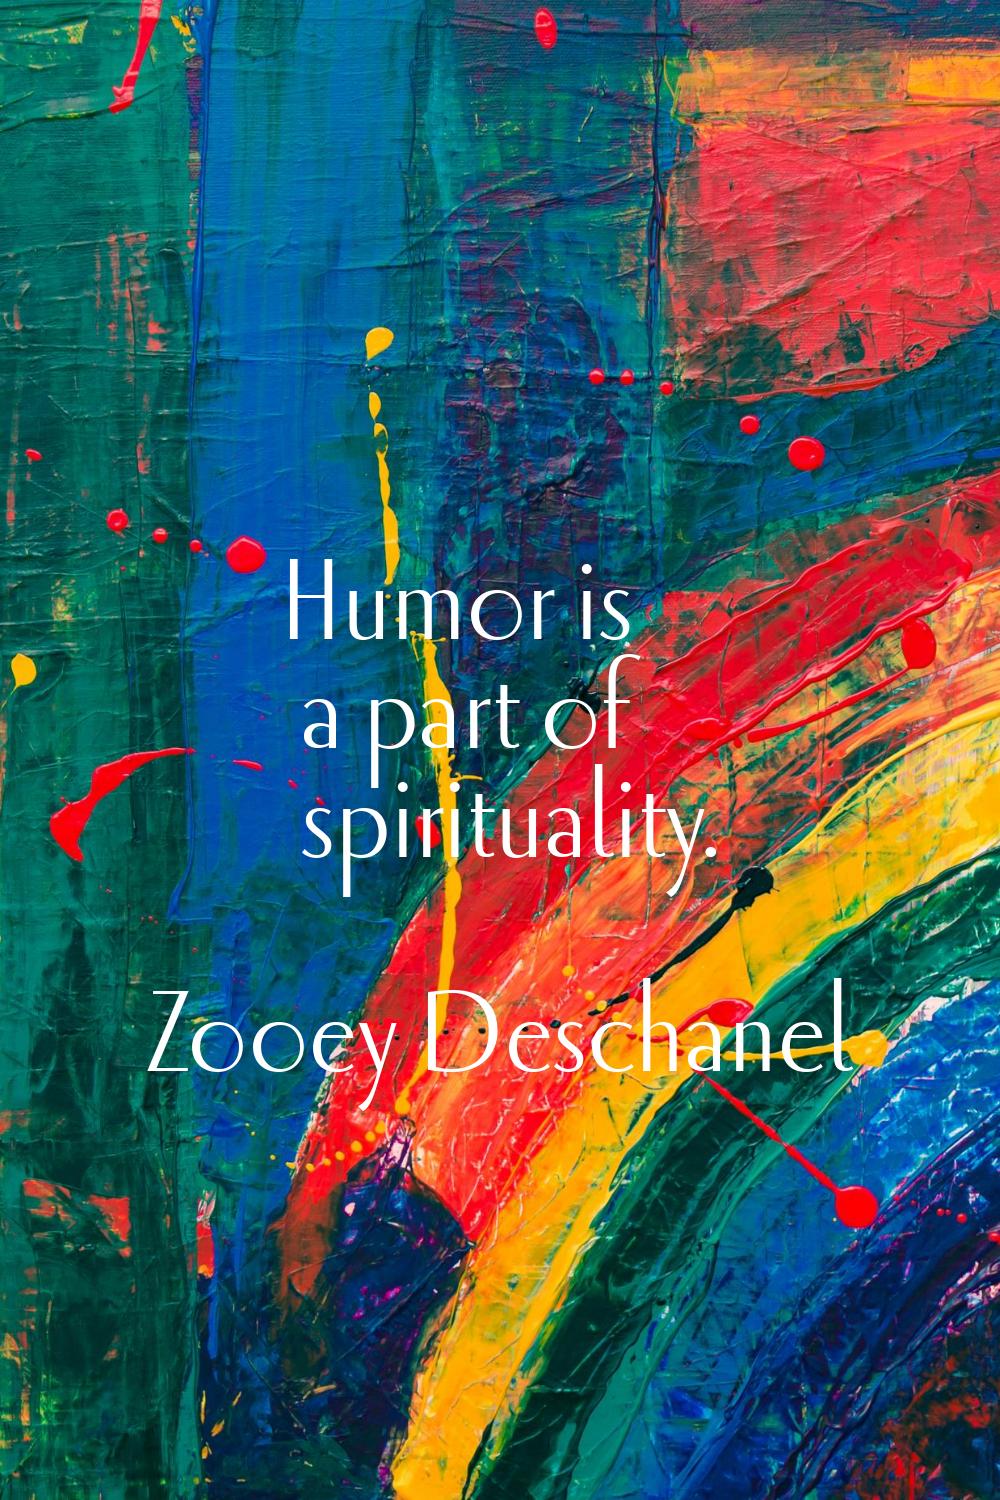 Humor is a part of spirituality.